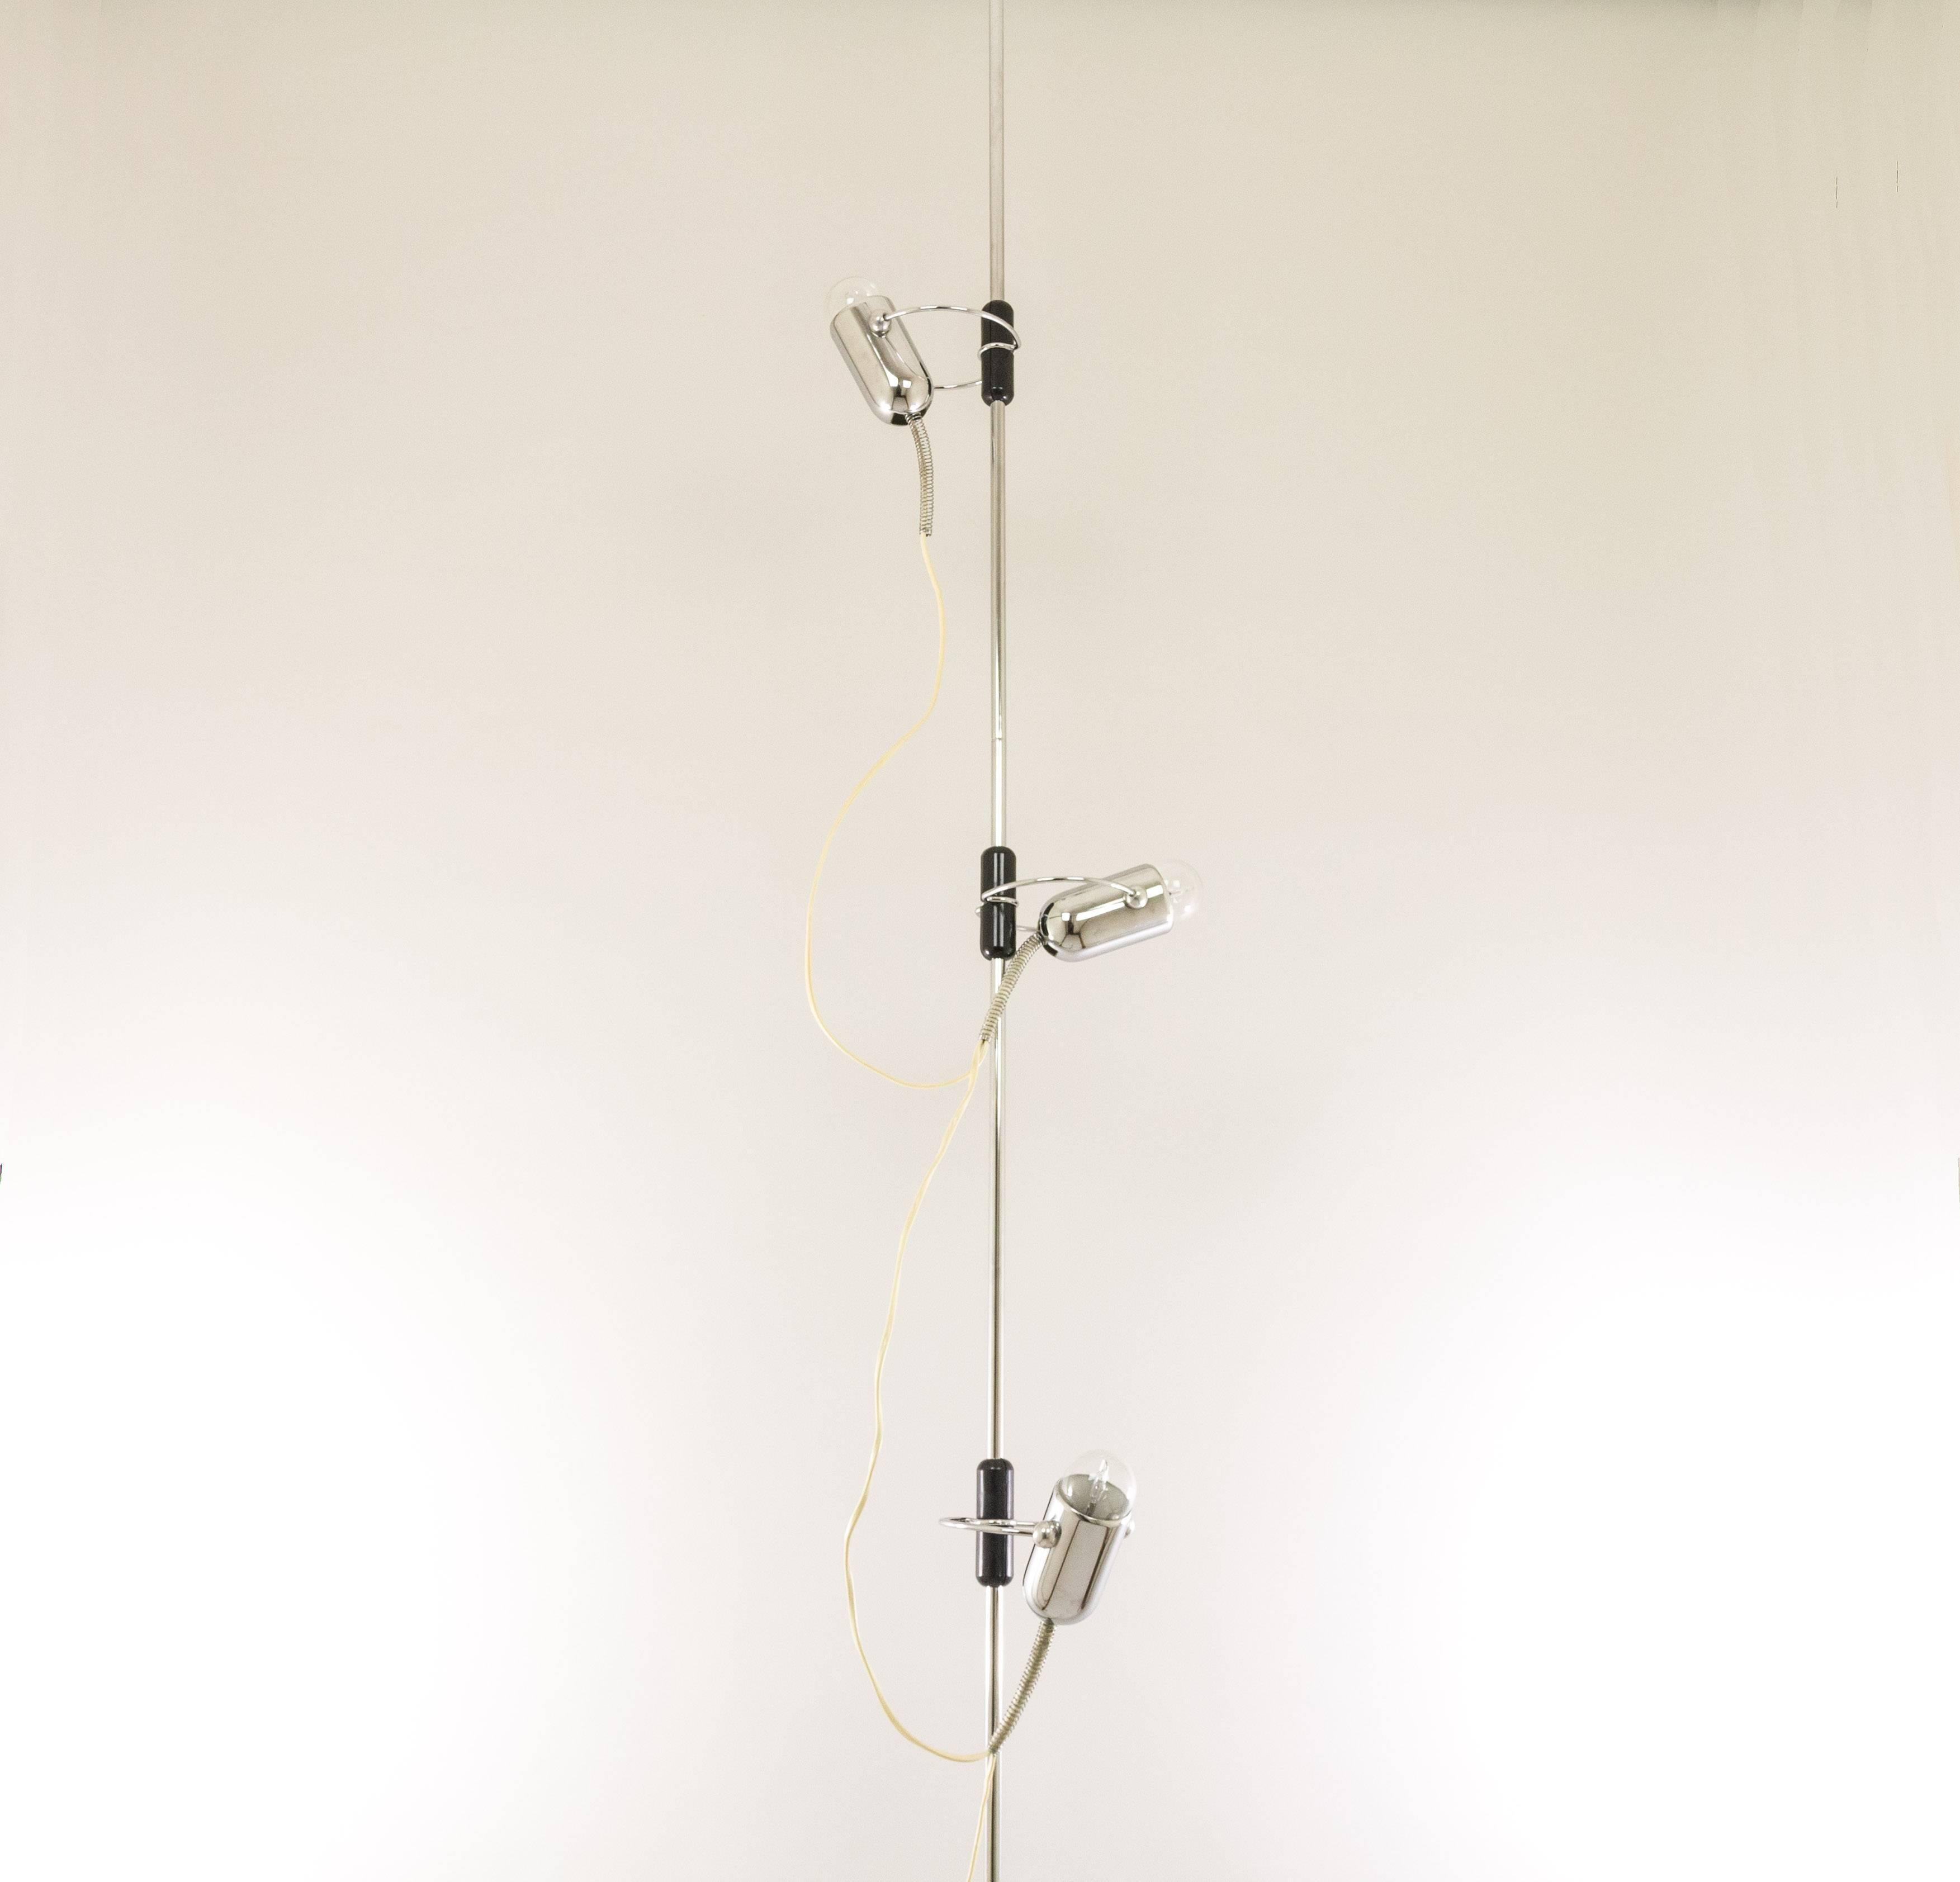 This lamp that stretches from floor to ceiling was designed during the 1960s by Francesco Fois and manufactured by Reggiani.

The construction exists of three equal 'rods' of each 90 cm long, two 'springs' of maximum 40 cm high and three chrome spot